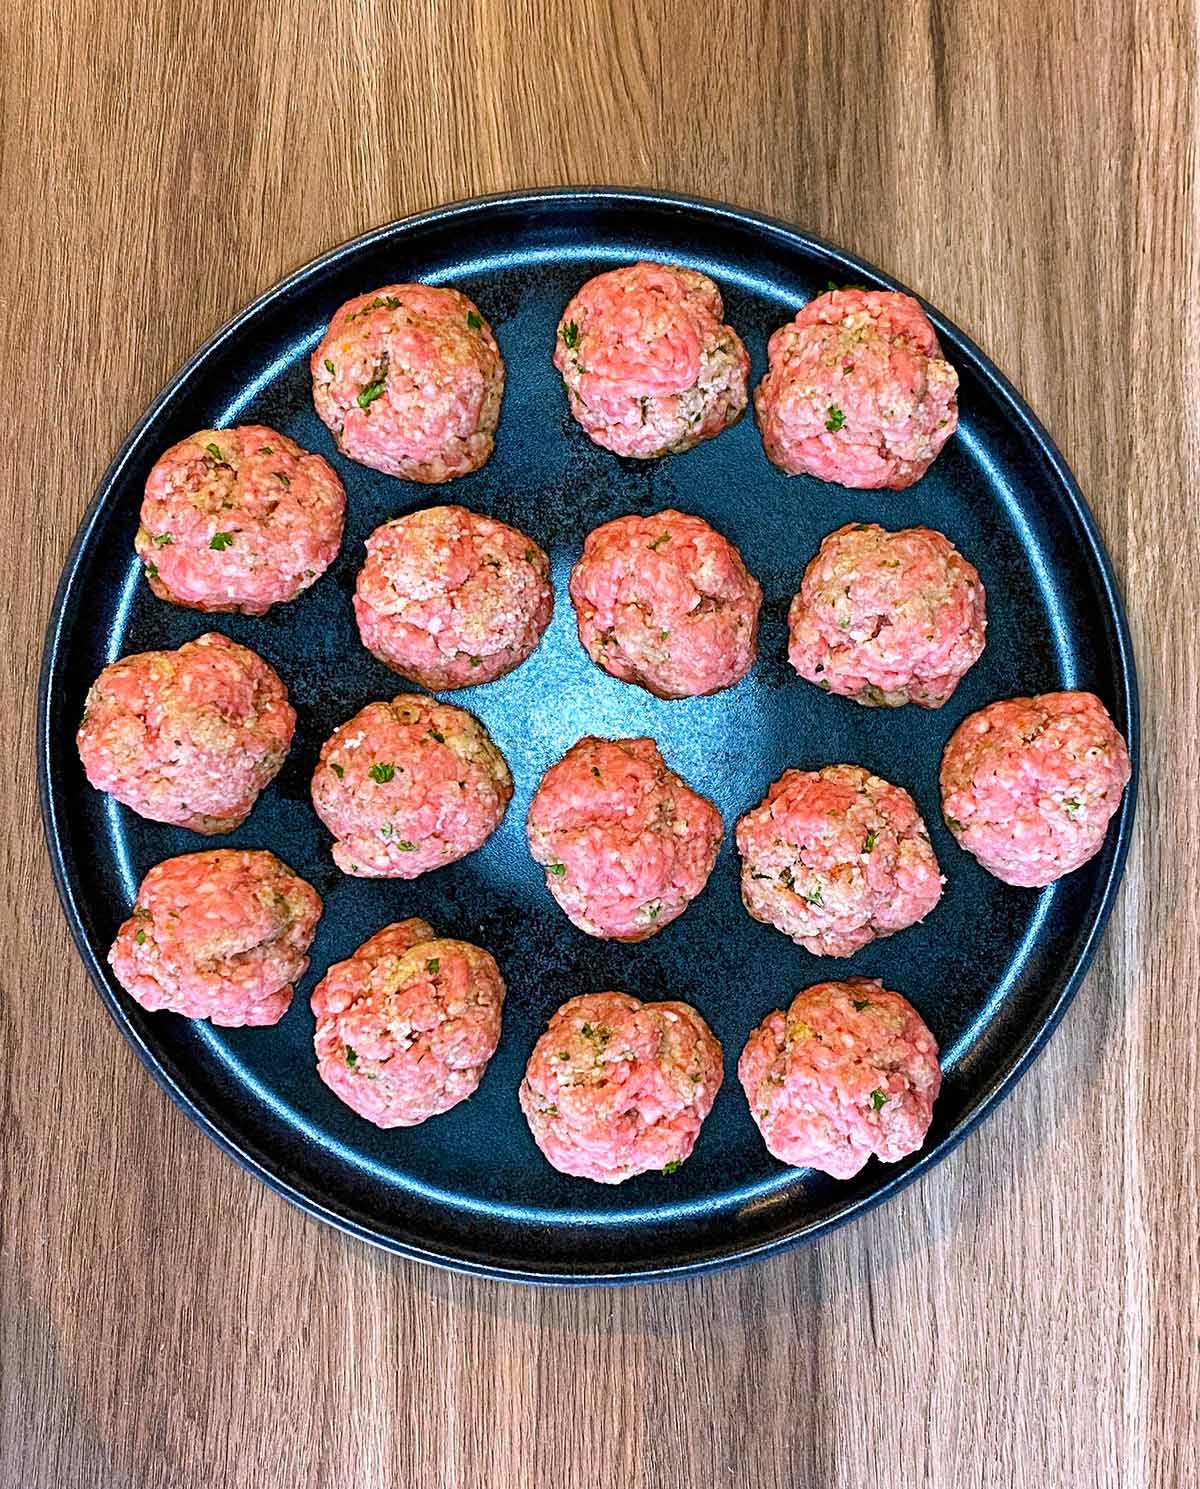 Sixteen uncooked meatballs on a black plate.